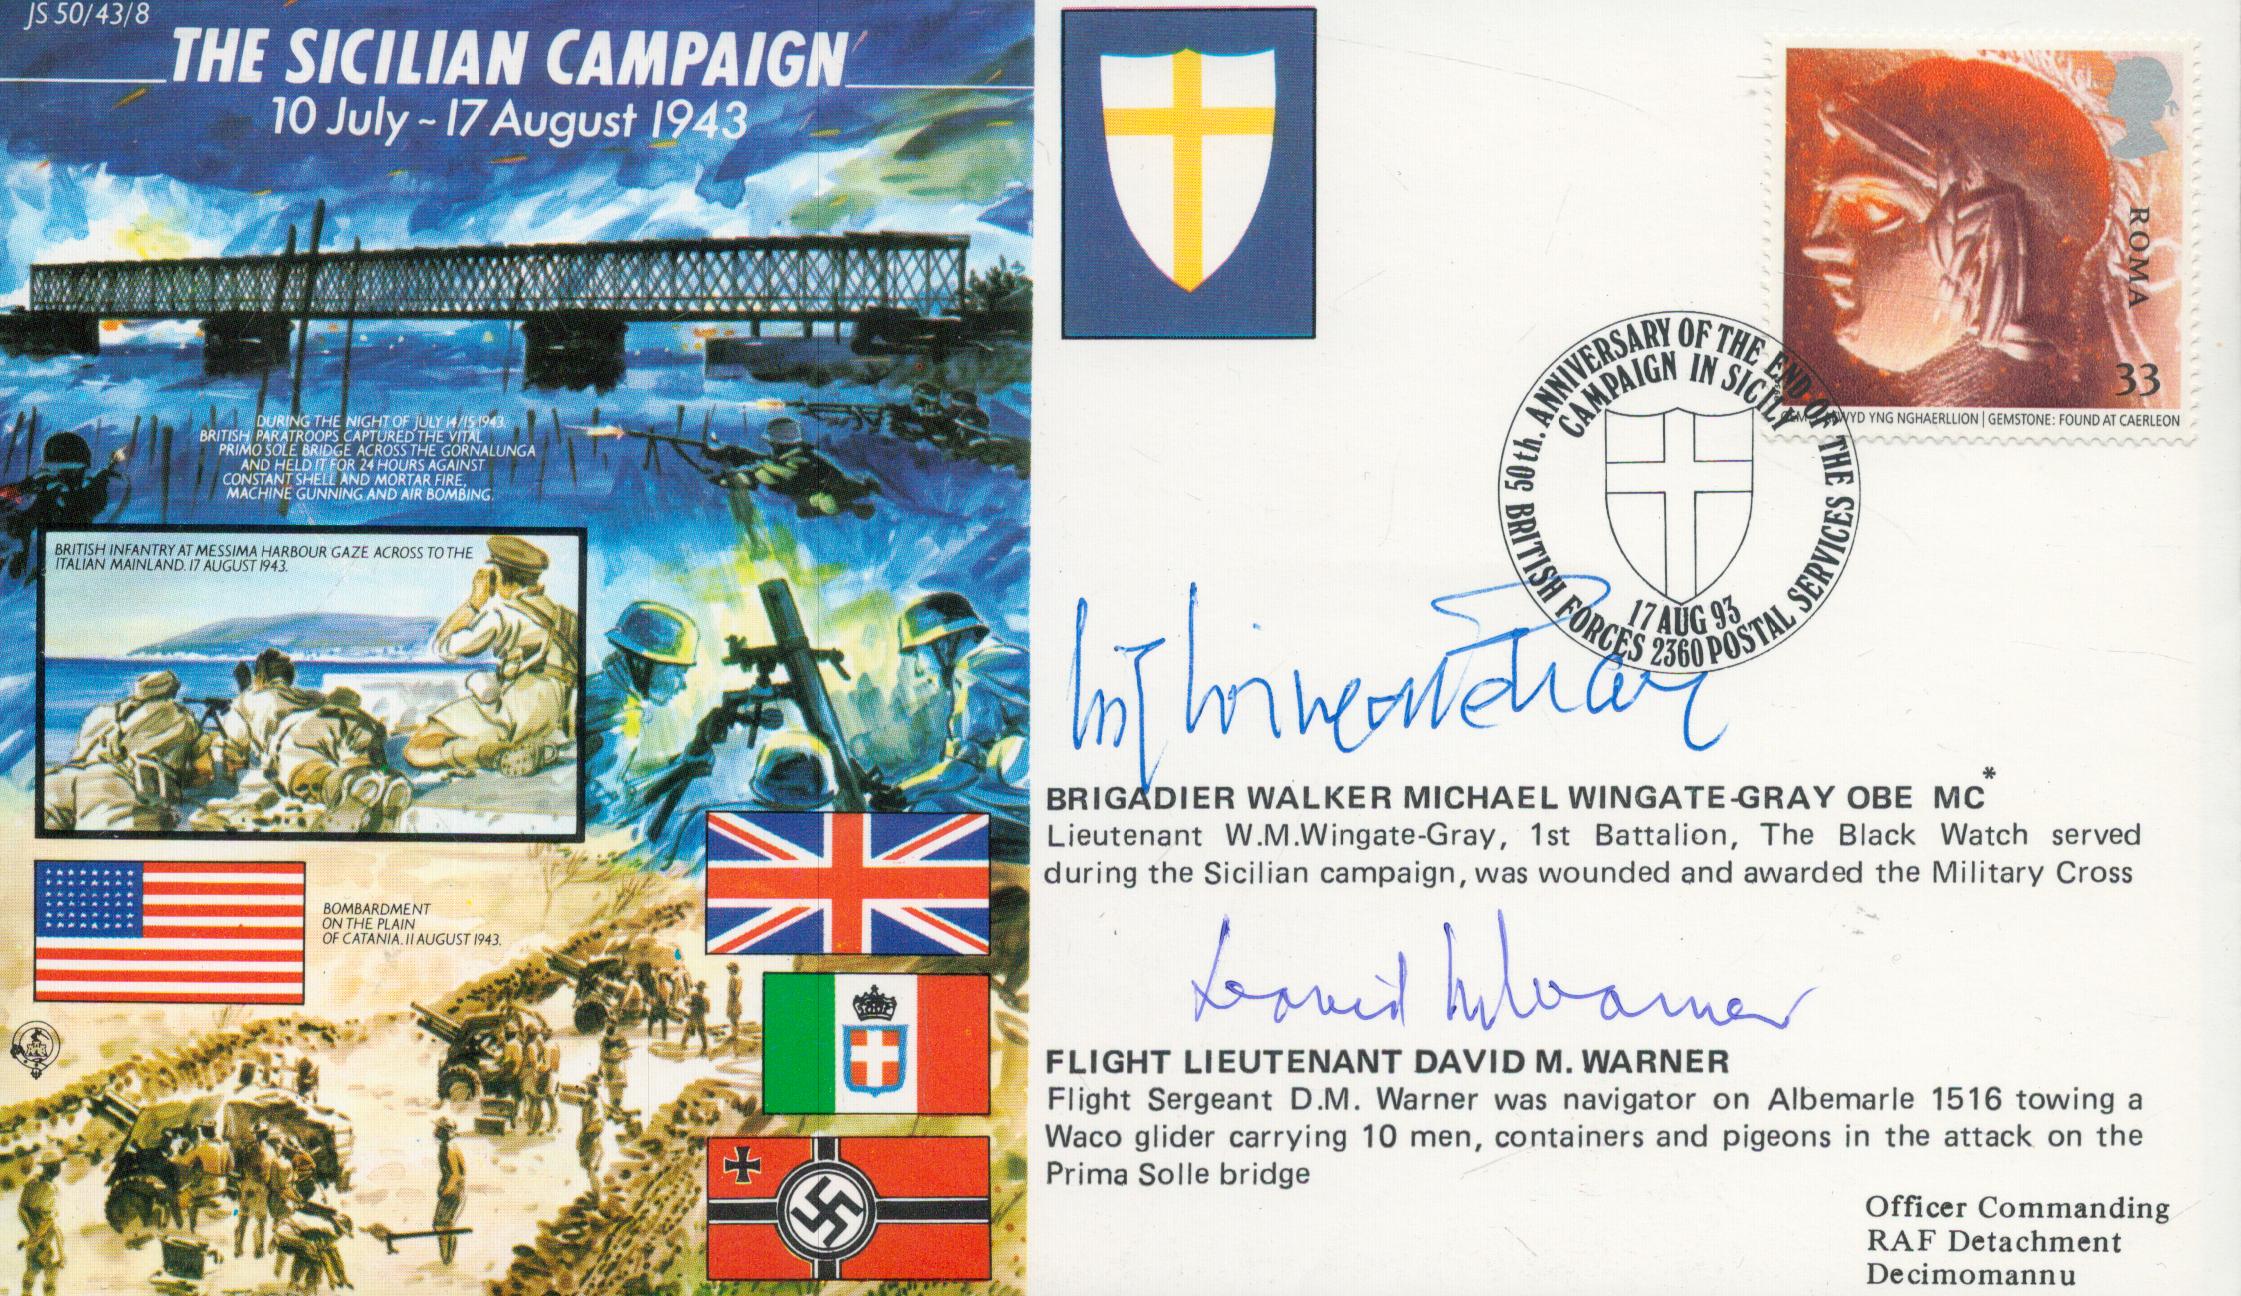 The Sicilian Campaign double signed 50th ann WW2 cover JS50/43/8. Signed by veterans Brig Walker